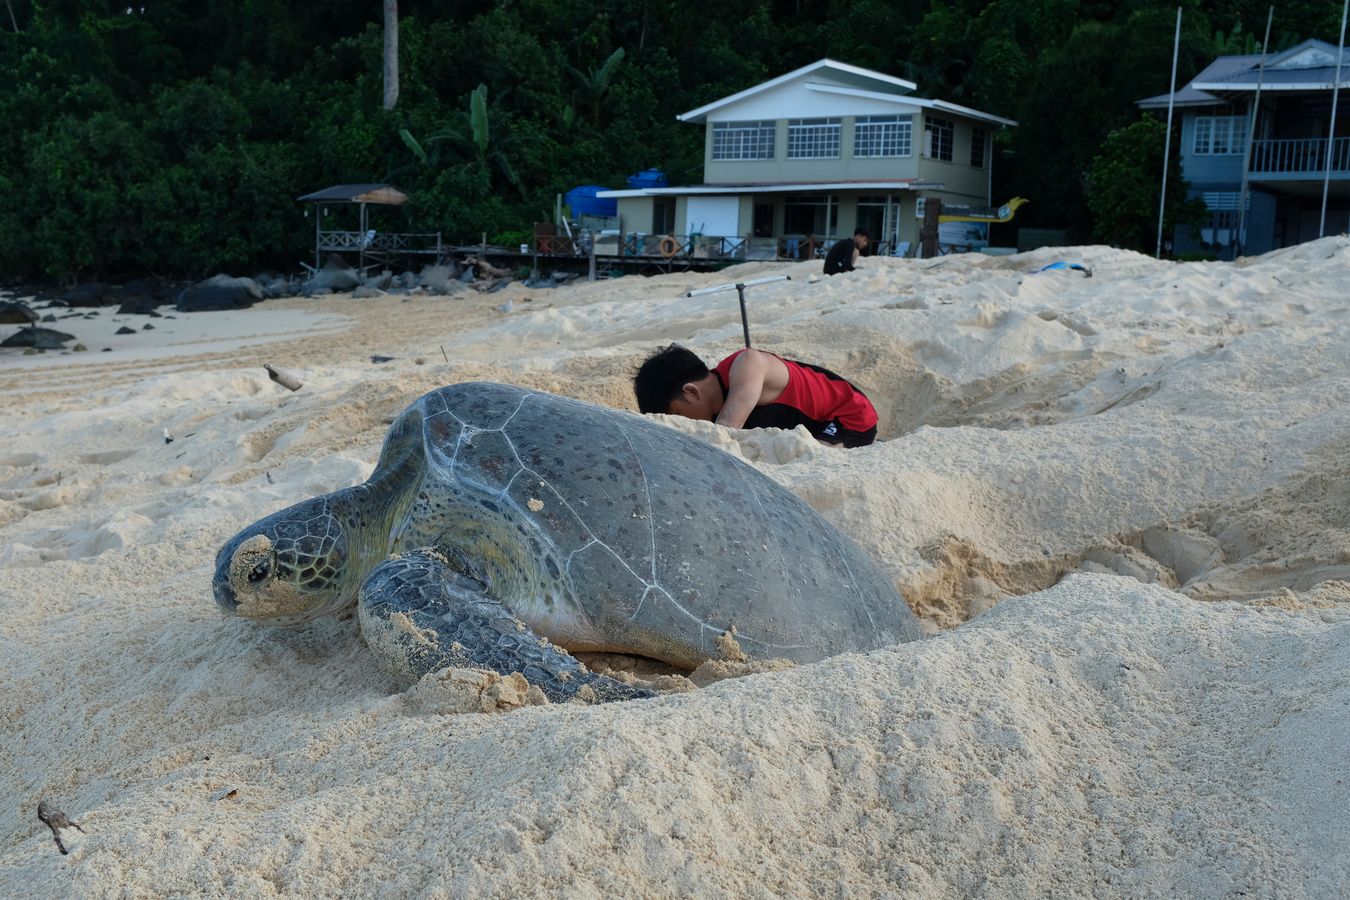 Early in the morning a green turtle returns to the ocean after laying its eggs, in the background Aidil and Aldrin collect eggs from other nests.